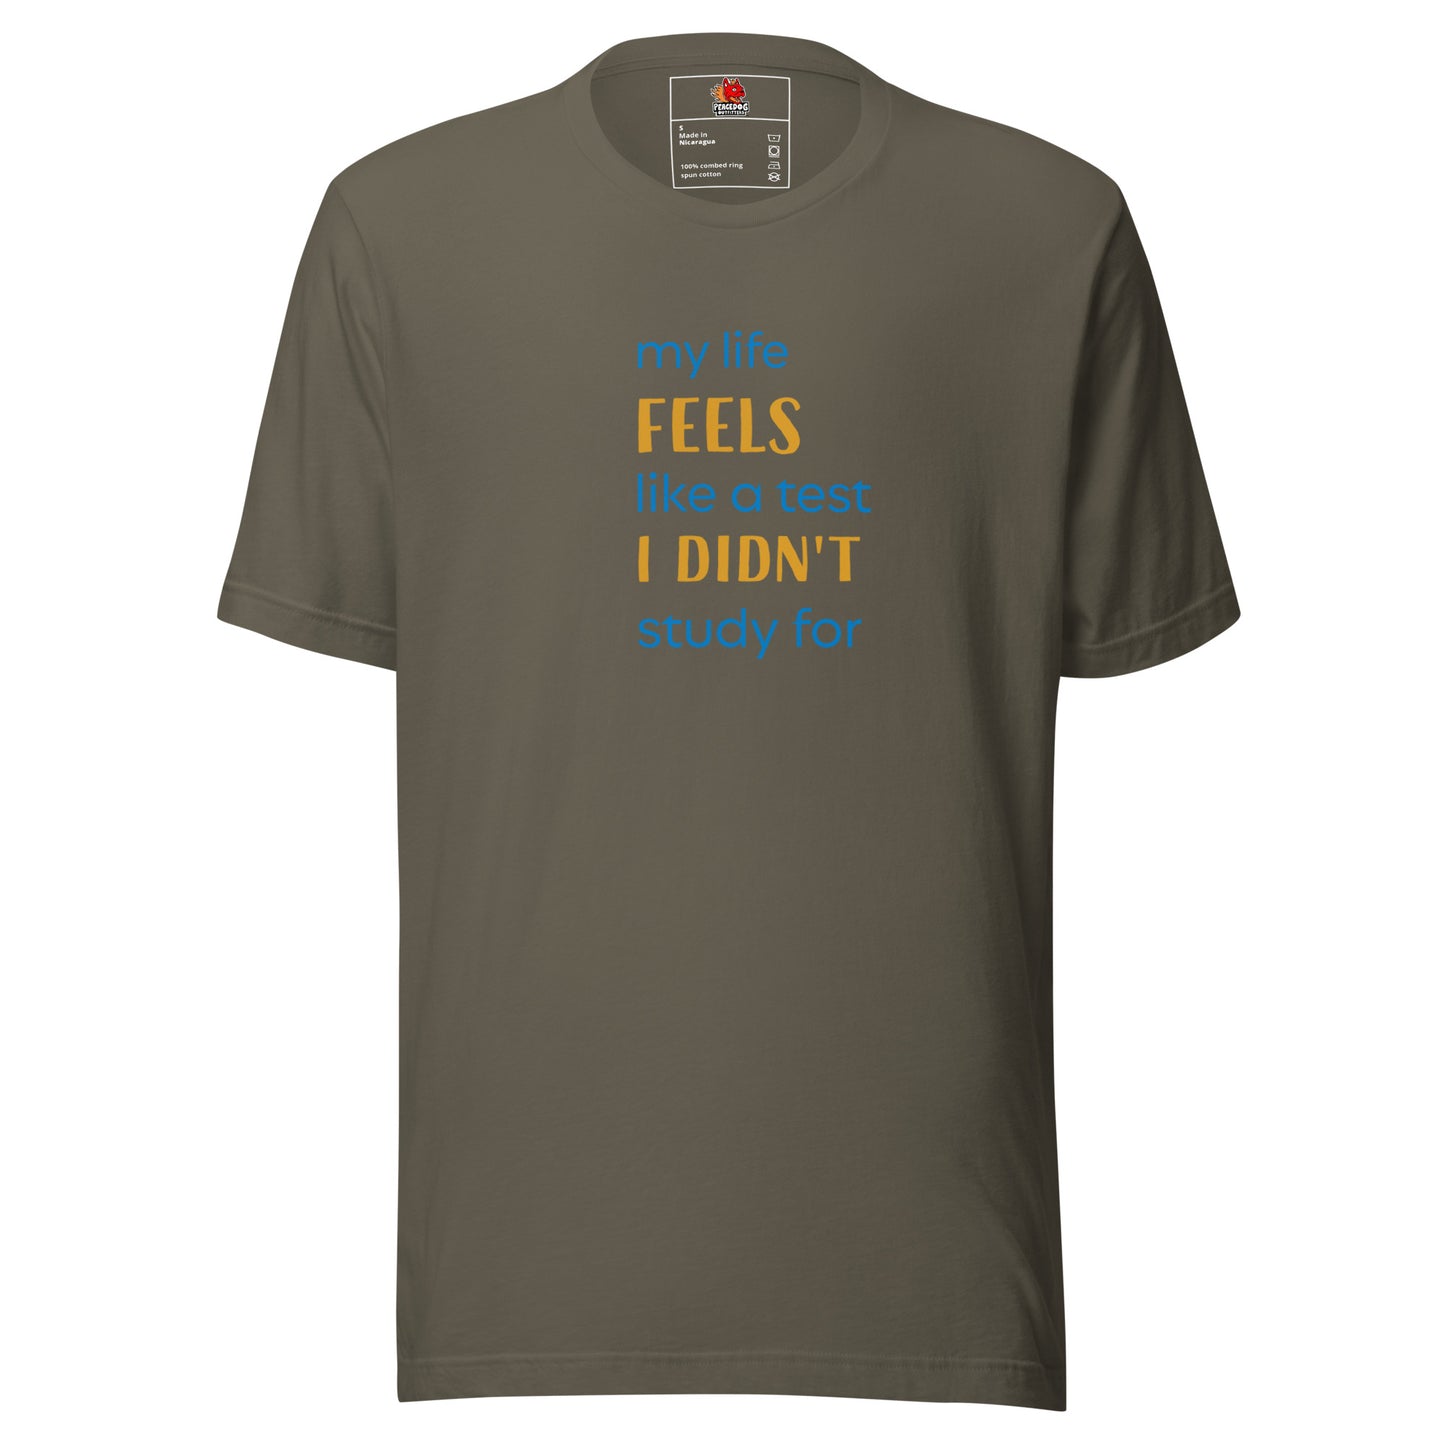 My Life Feels Like a Test I Didn't Study For T-shirt